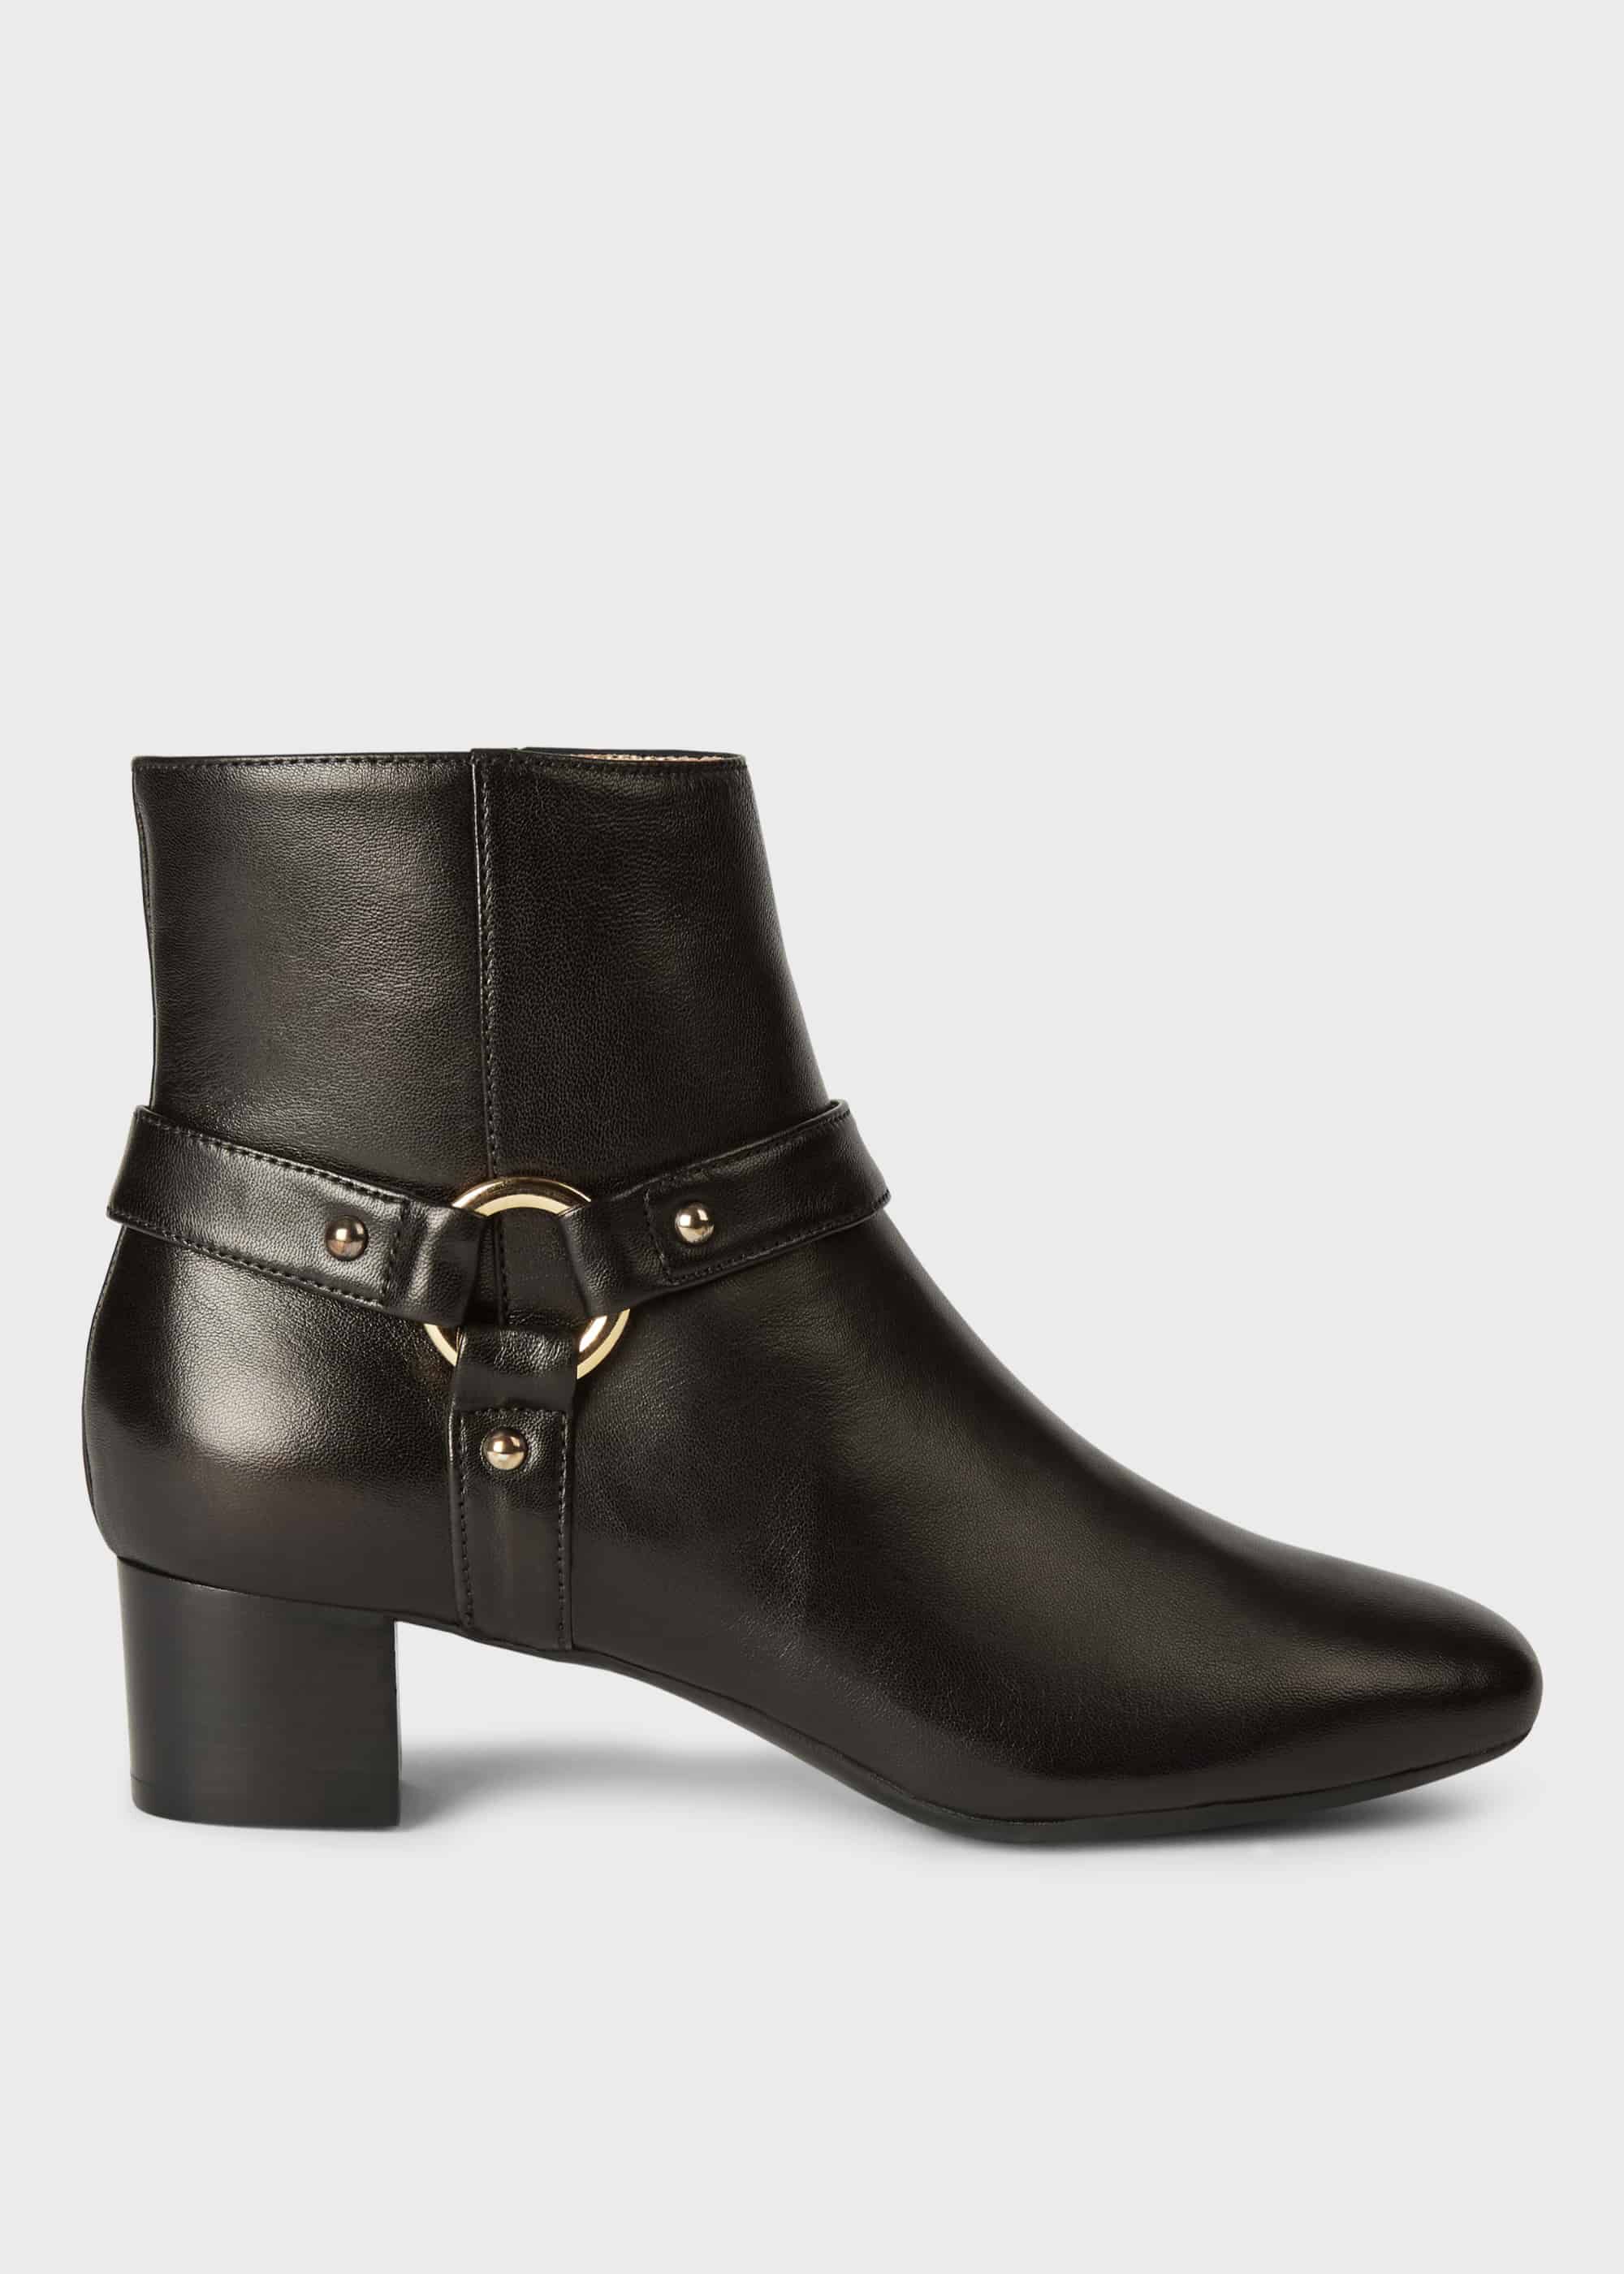 Pre-owned Hobbs Piper Ankle Boot